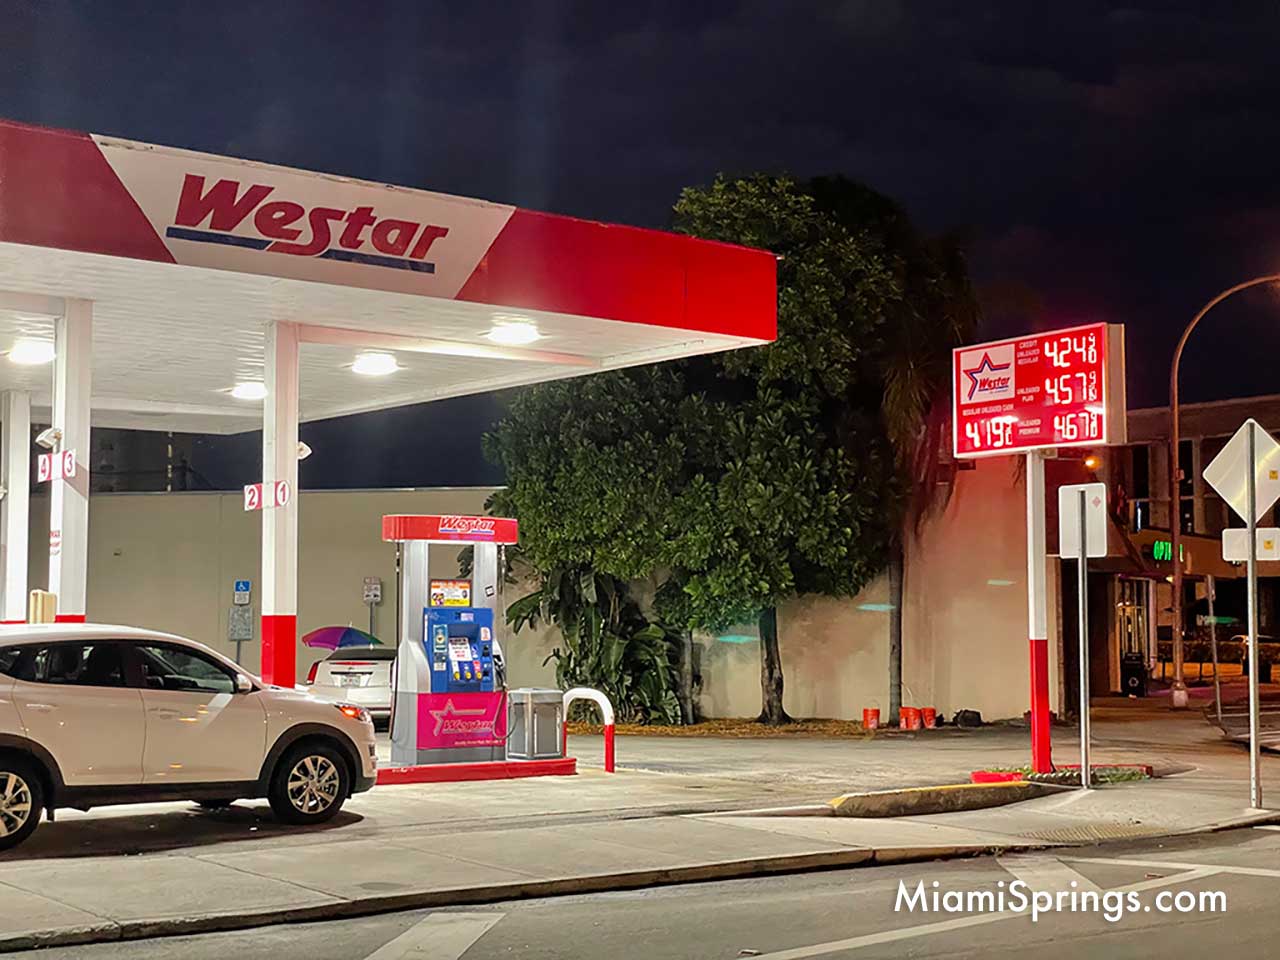 Westar gas prices May 16, 2022